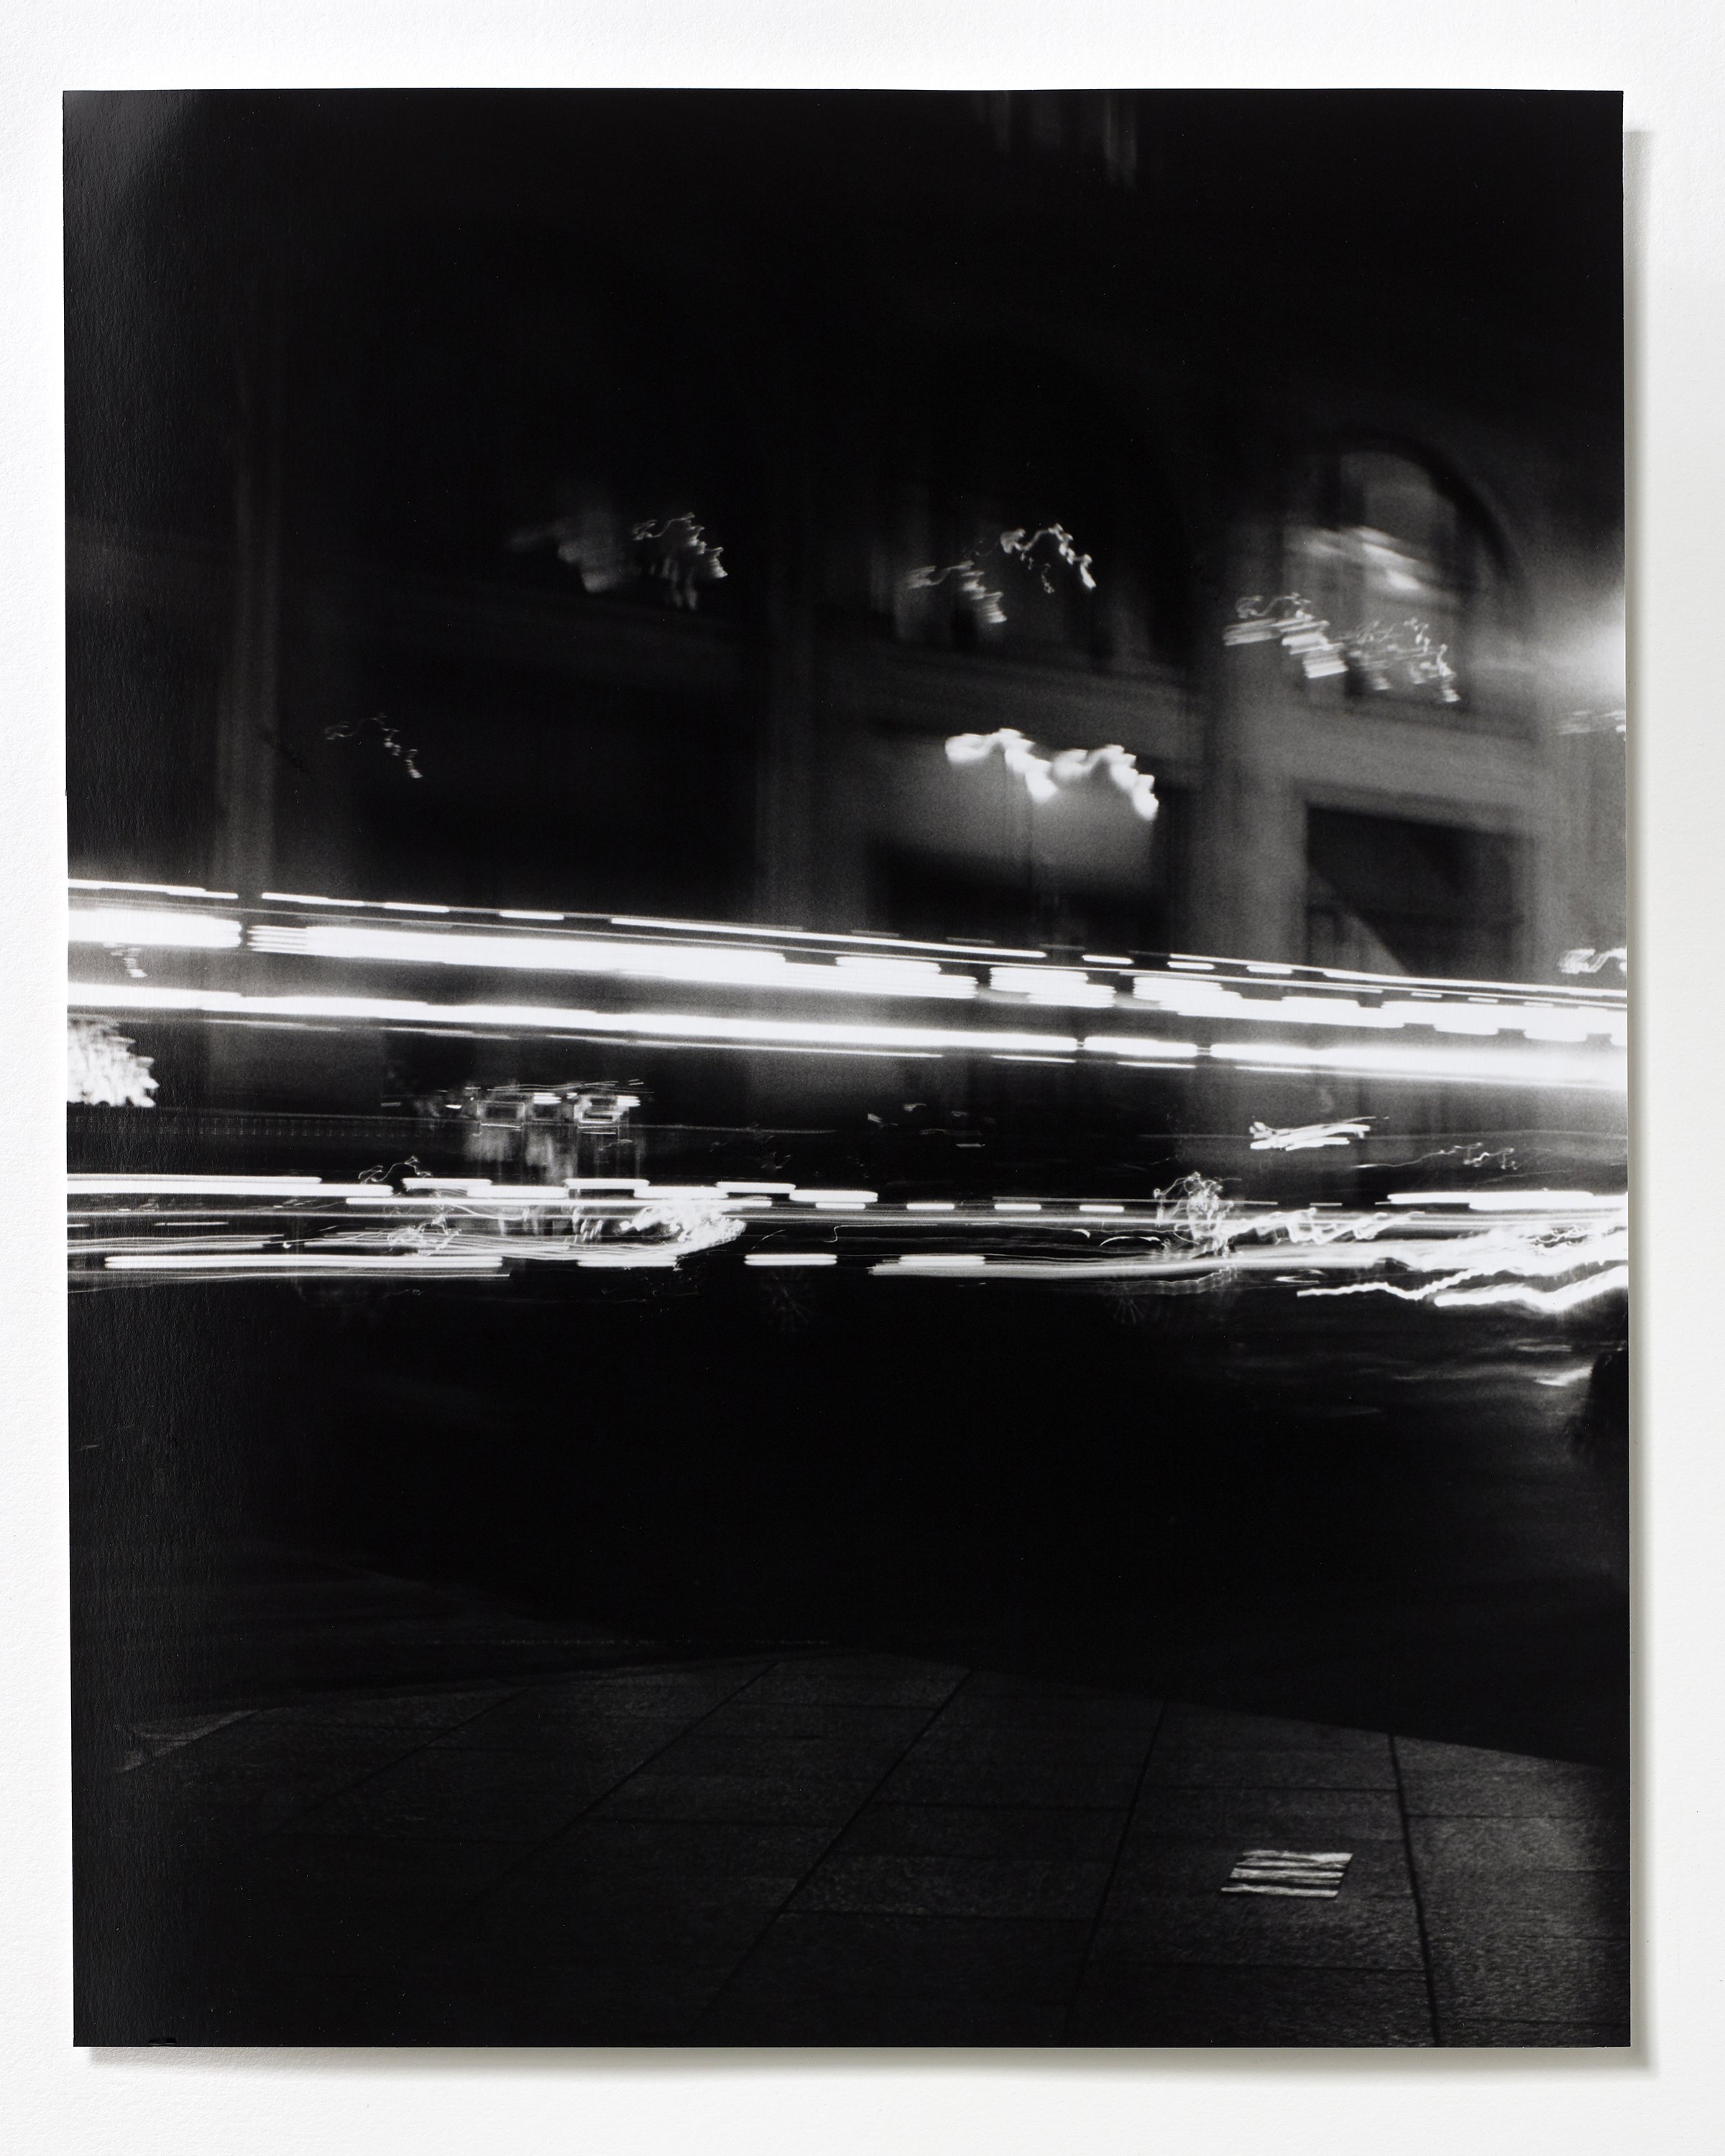 "Corner of 34th Street and 5th Avenue, facing North, 9:06pm"